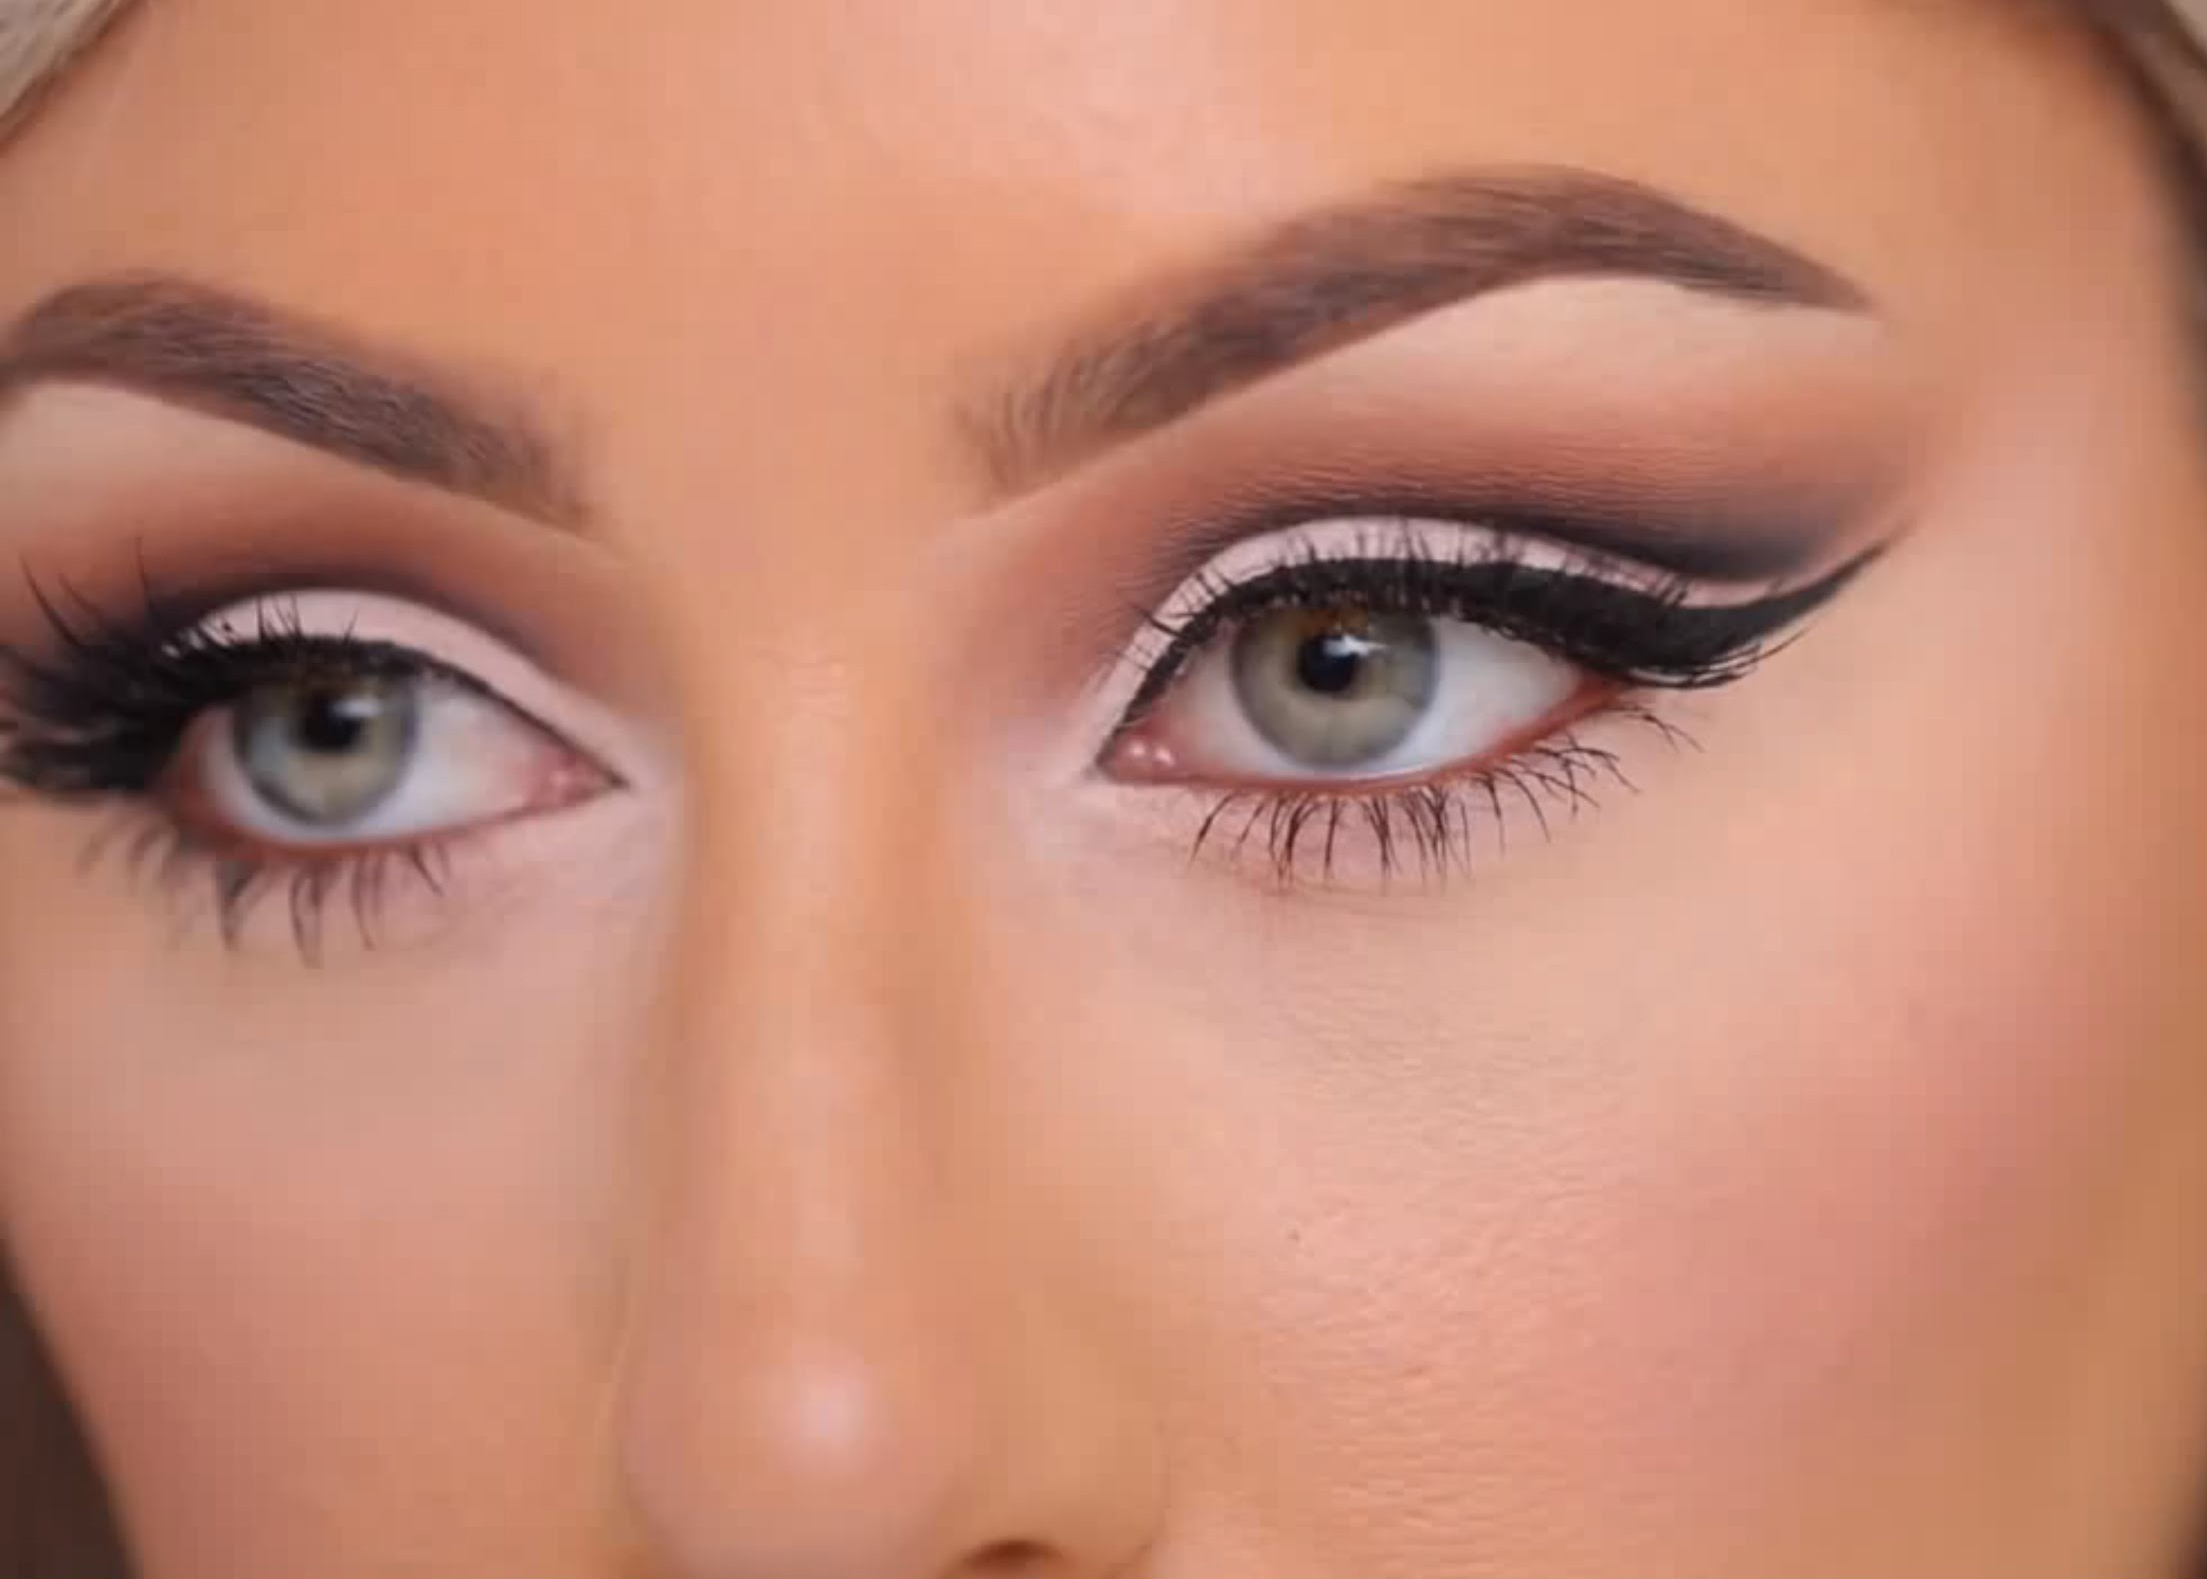 Cut Crease Eye Makeup How To Create A Cut Crease With Eyeshadow So Your Eyes Look Bigger